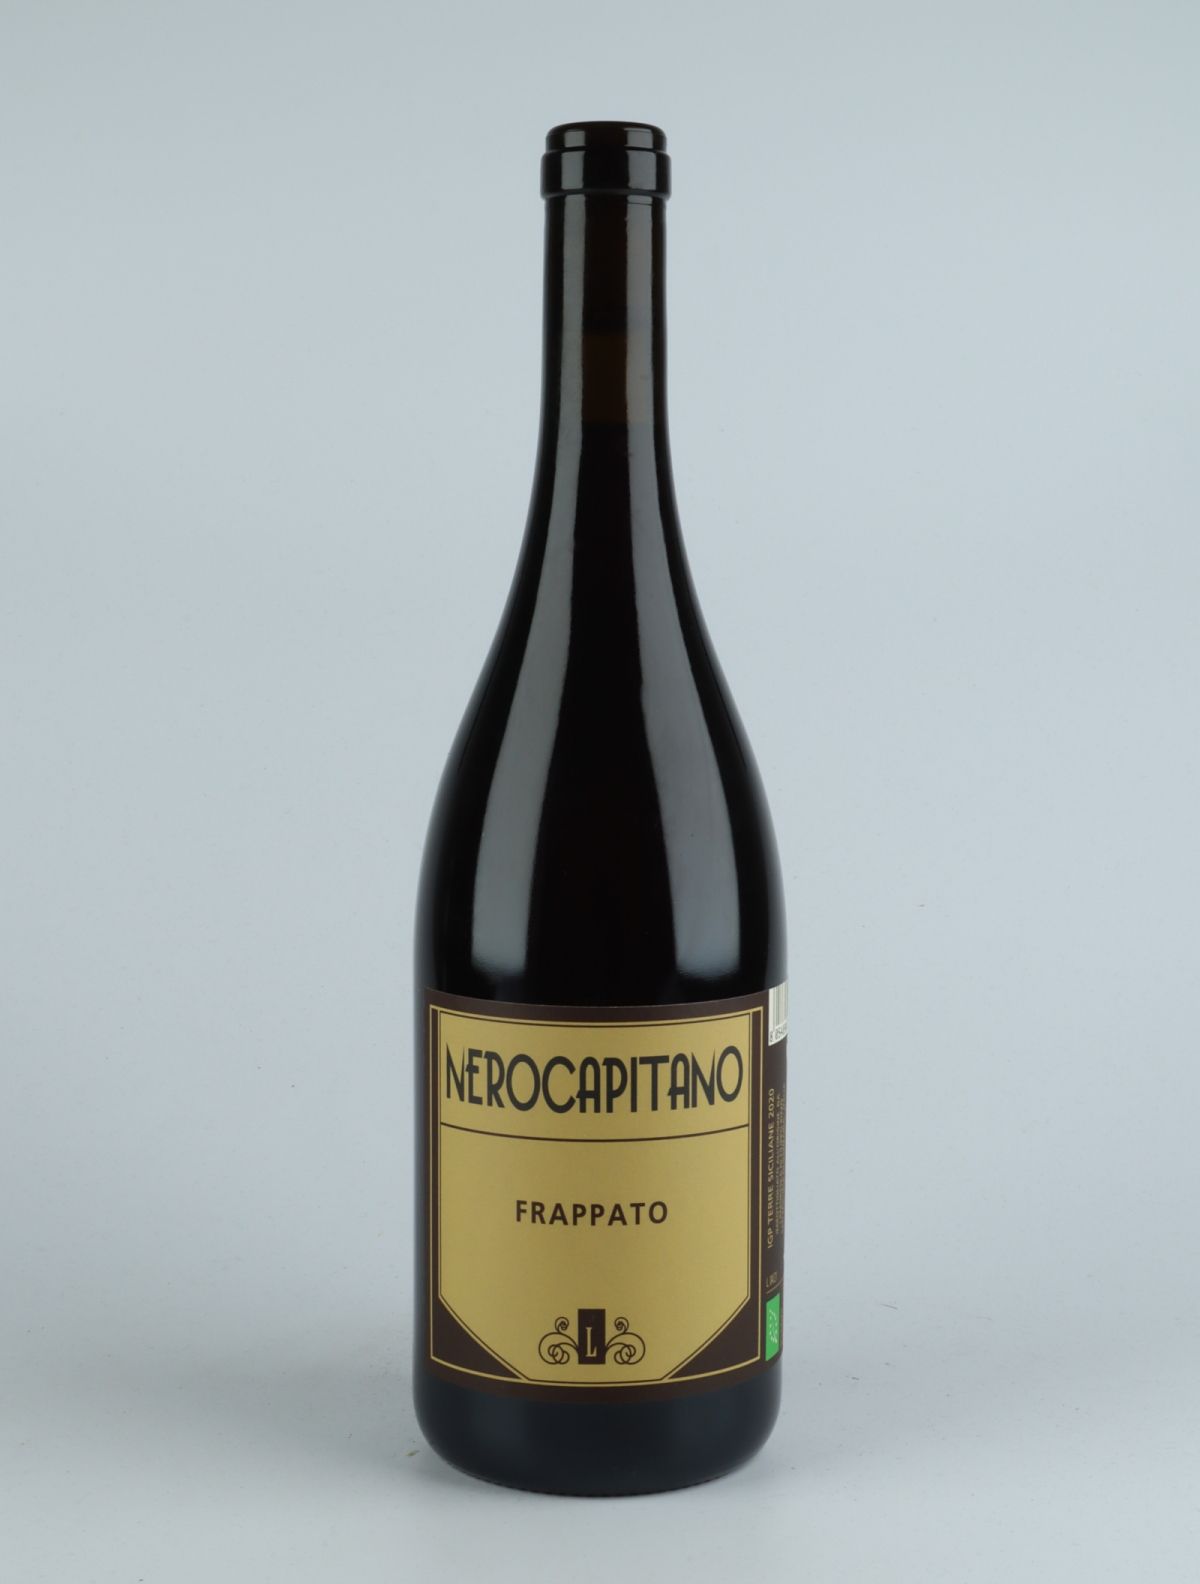 A bottle 2020 Nerocapitano Red wine from Lamoresca, Sicily in Italy